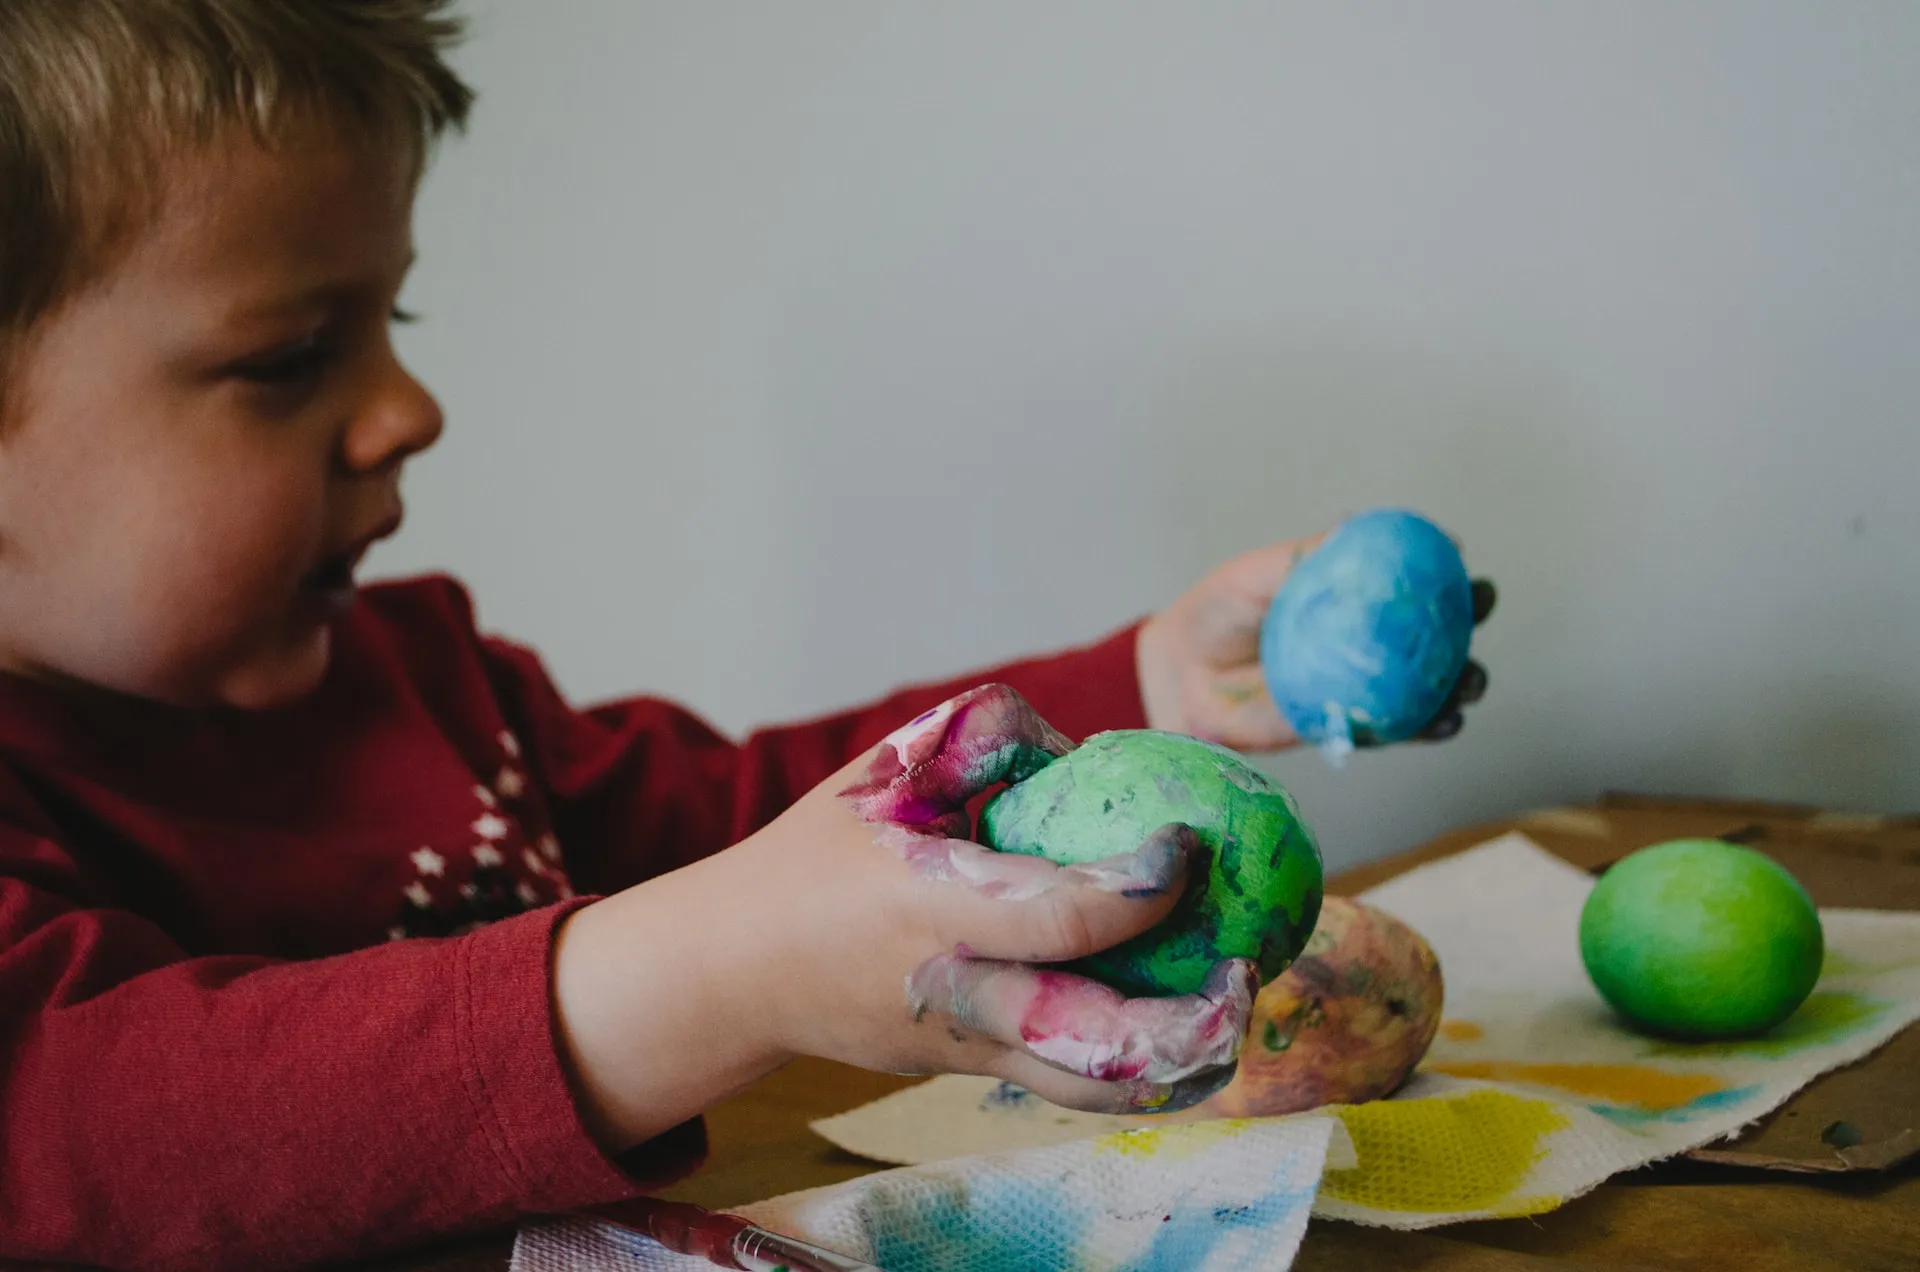 A kid painting eggs